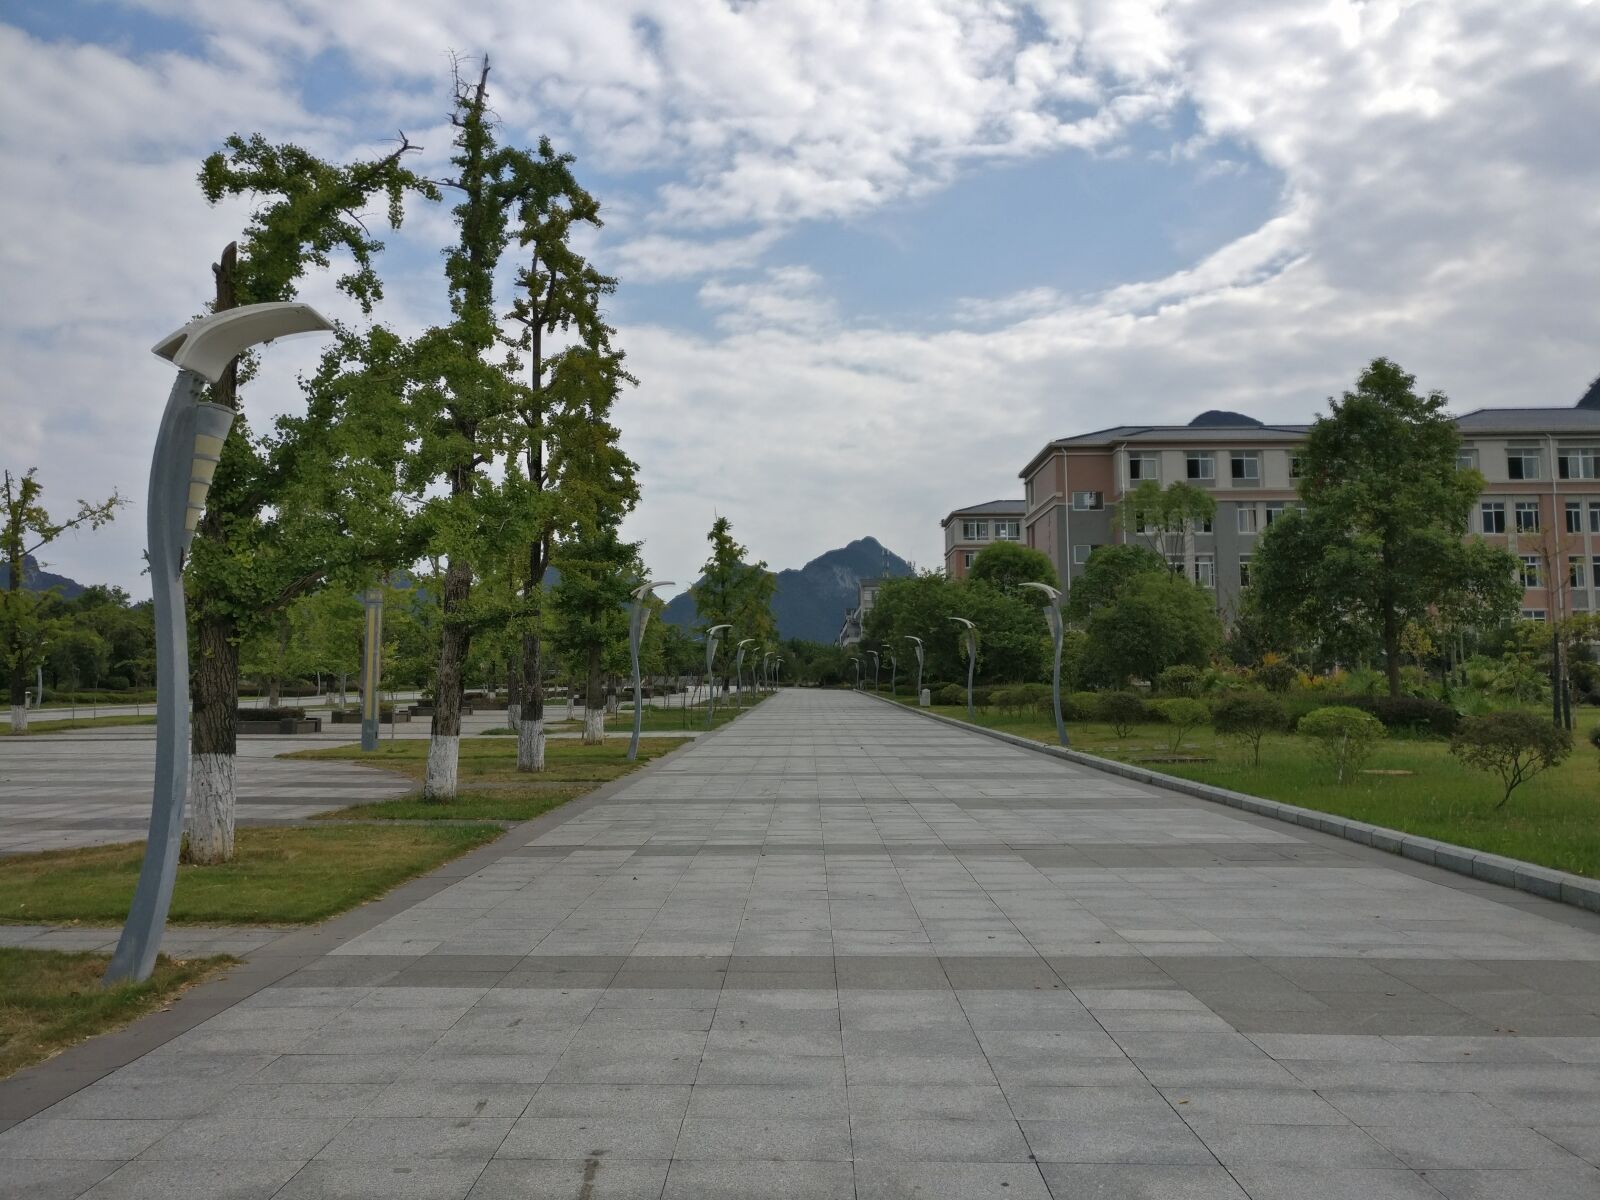 OnePlus A3000 sample photo. Campus, guilin university of photography